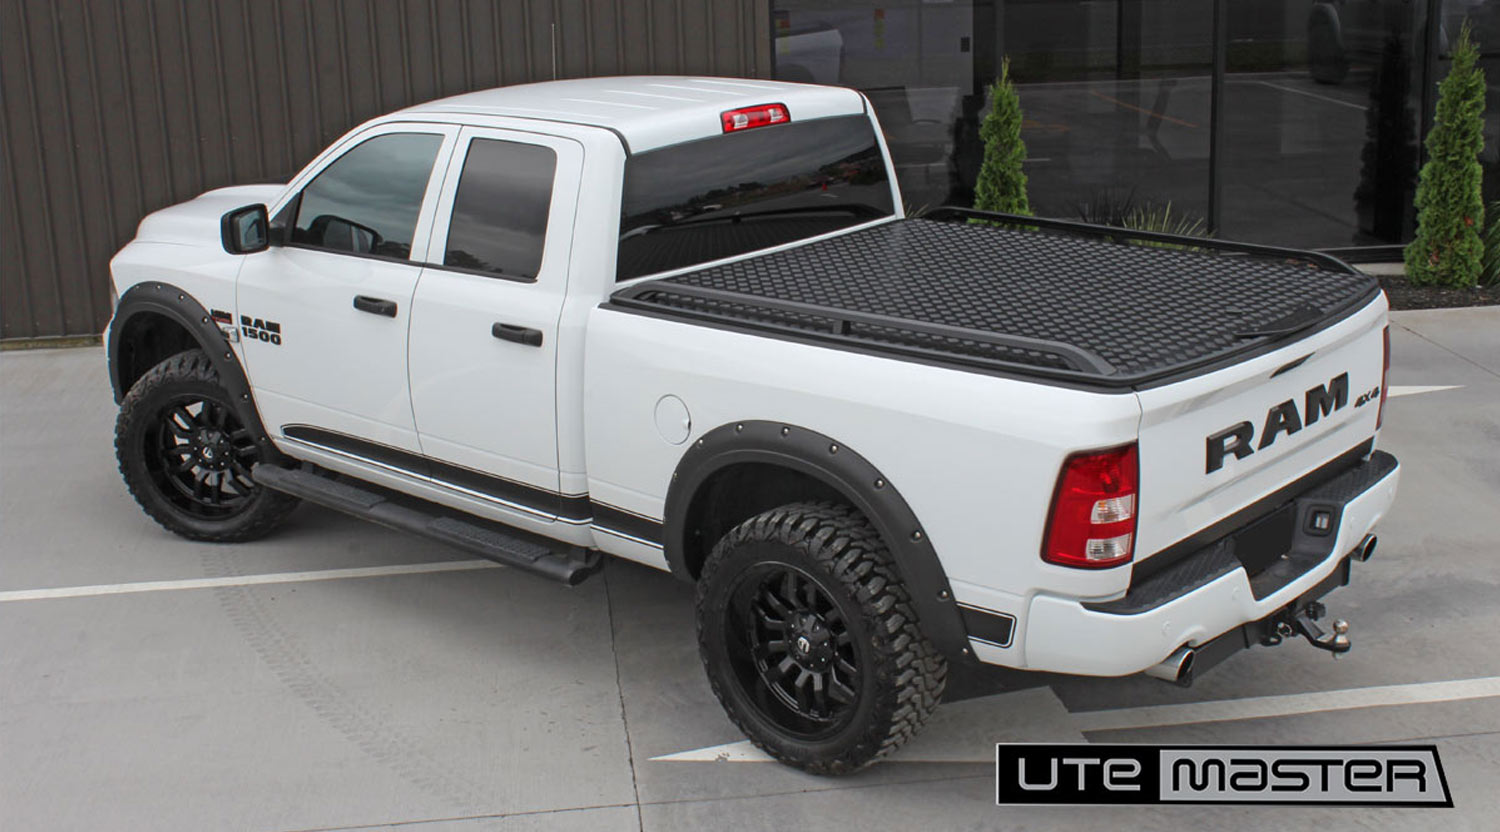 Load-Lid to suit Ram 1500 6'4